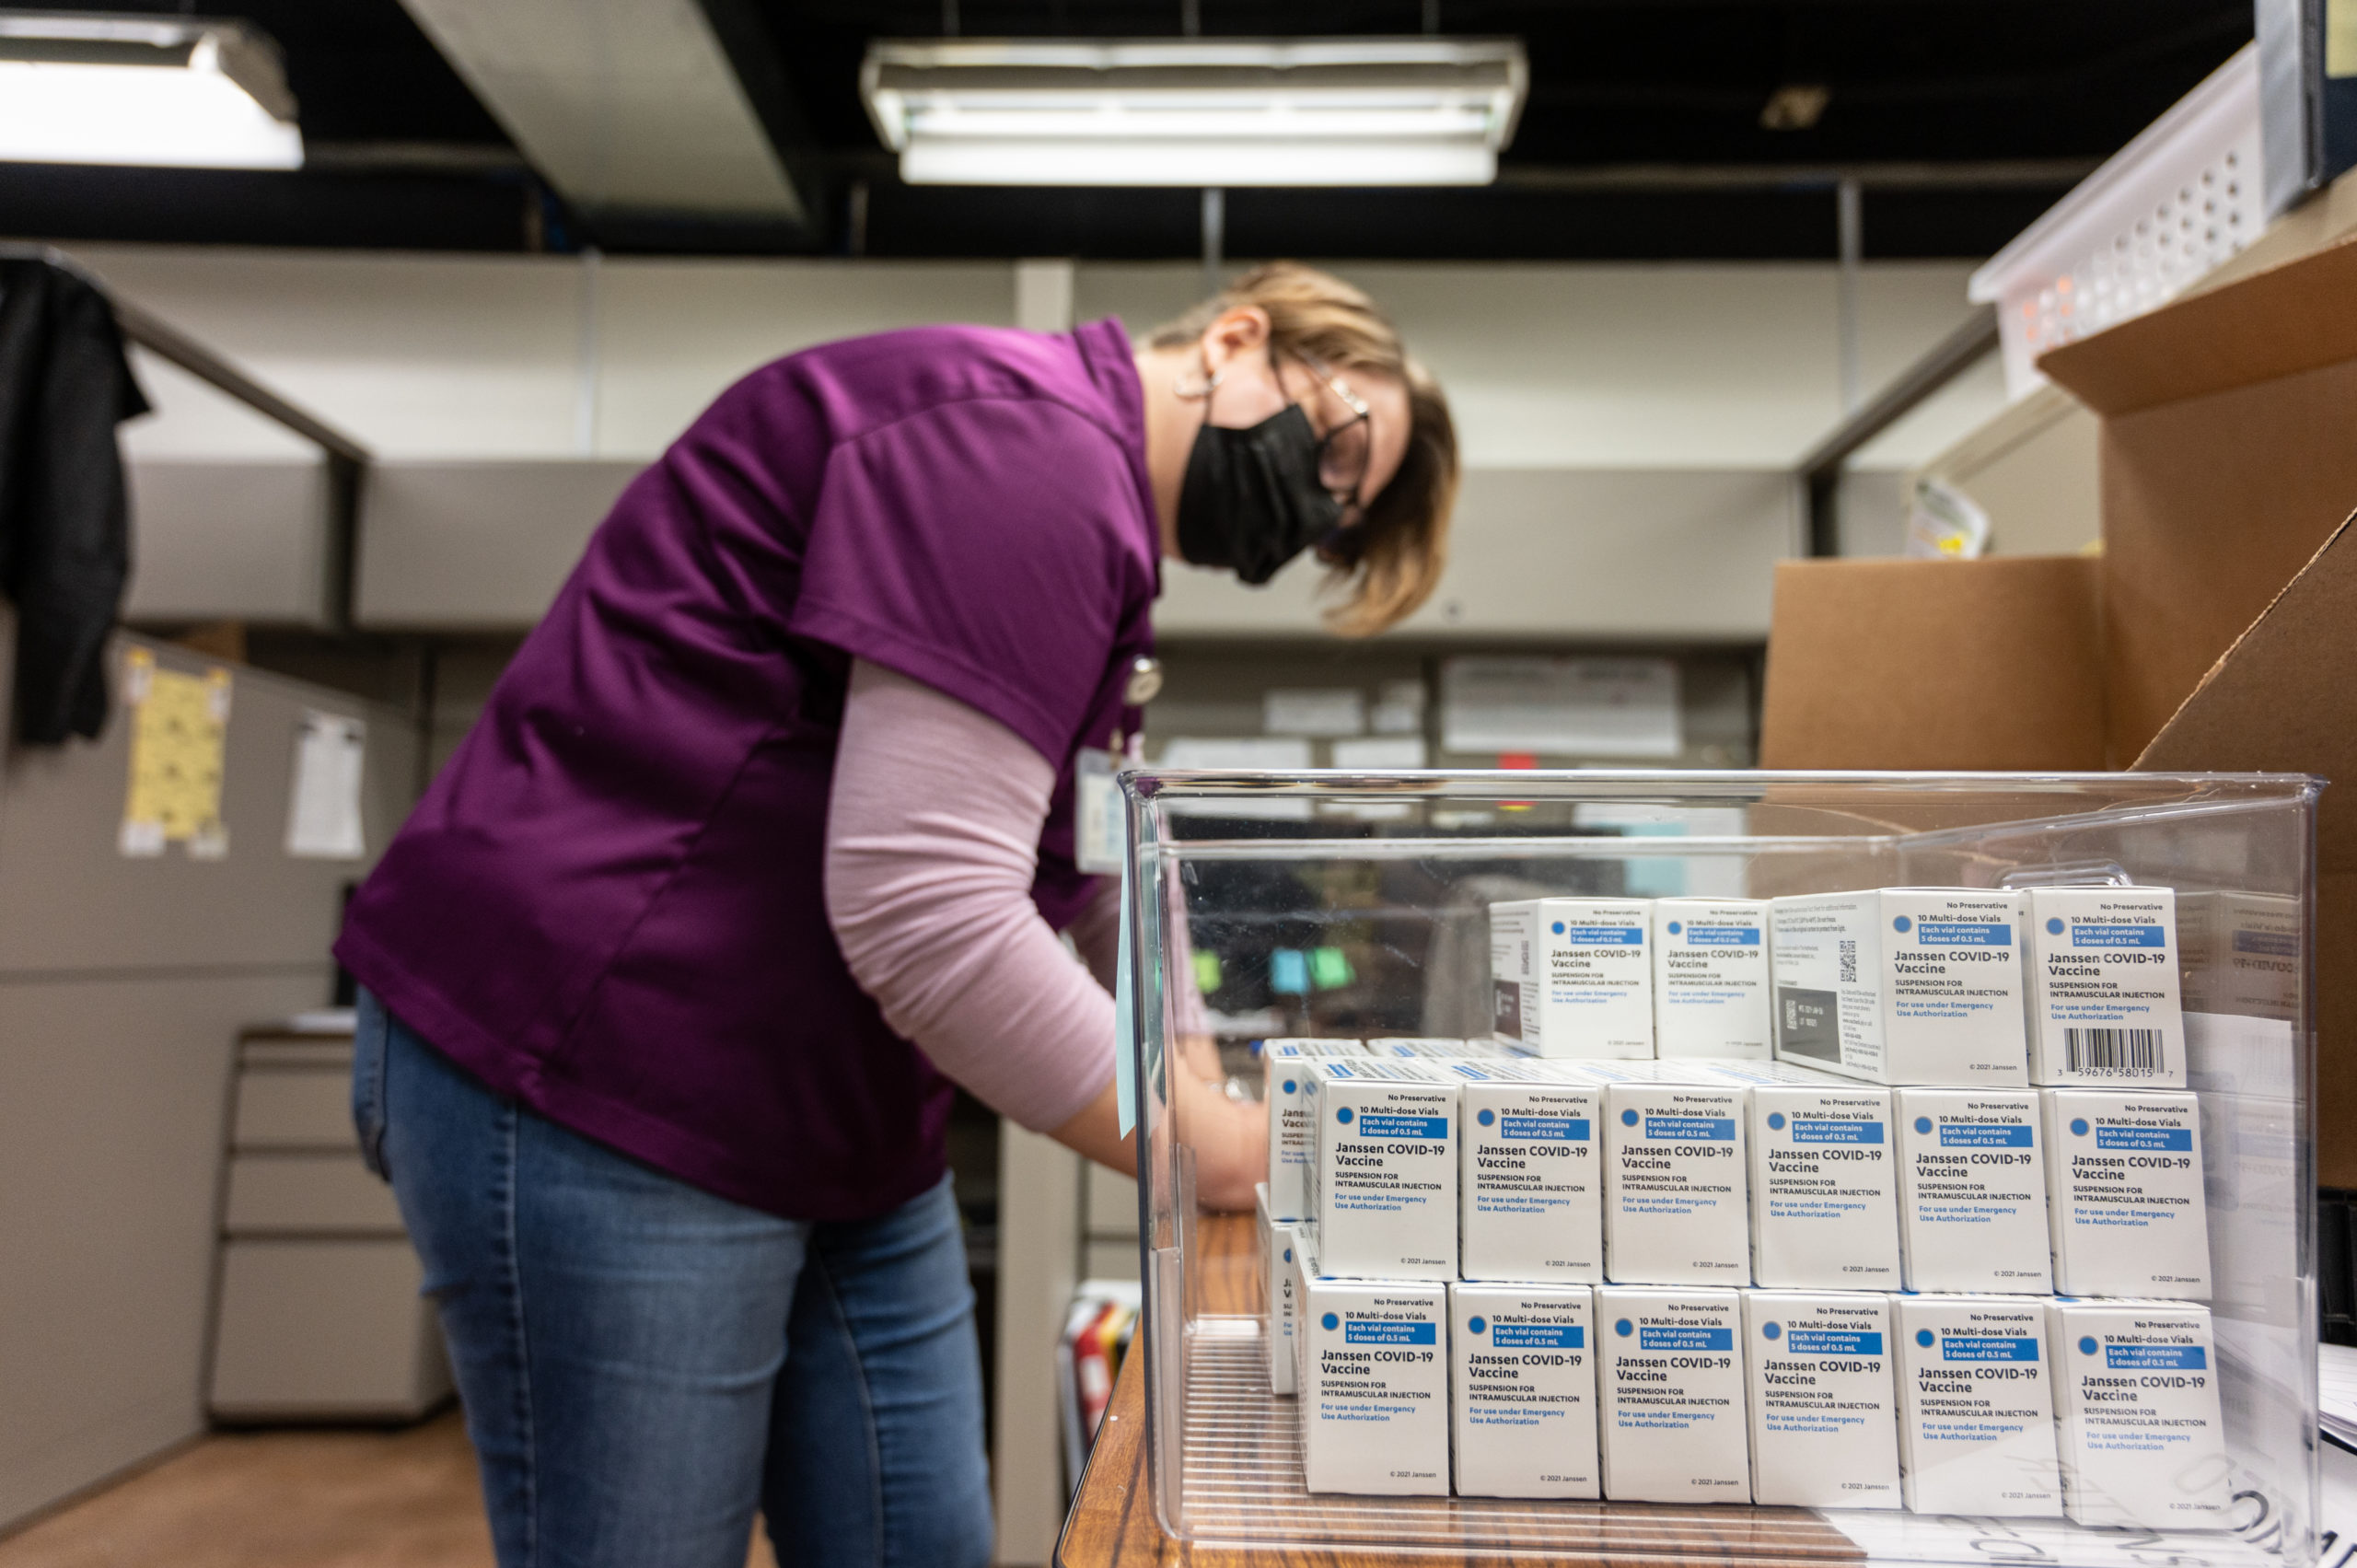 LOUISVILLE, KY - MARCH 04: Janet Gerber, a health department employee, fills out forms as boxes containing Janssen COVID-19 vials sit stacked upon each other shortly after their delivery to Louisville Metro Health and Wellness headquarters on March 4, 2021 in Louisville, Kentucky. (Photo by Jon Cherry/Getty Images)